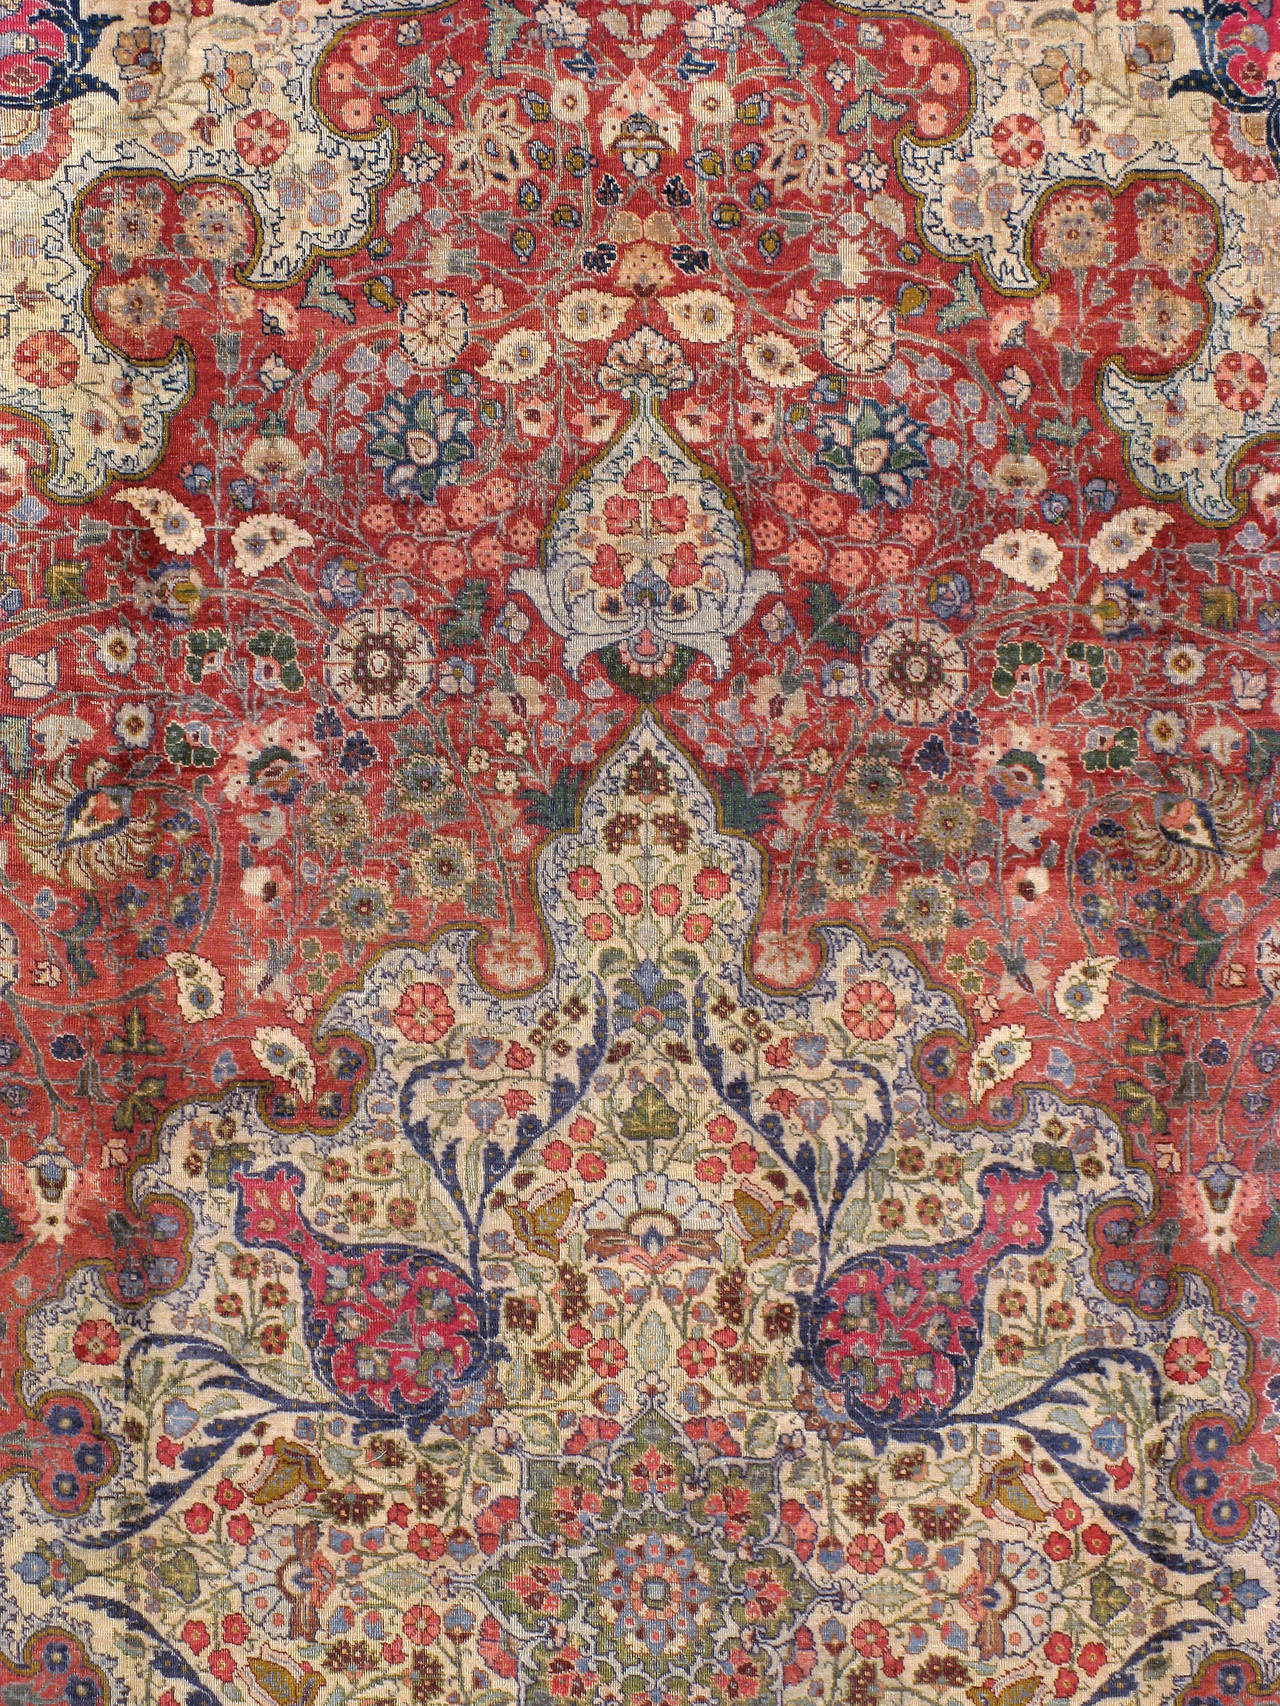 An antique Persian Tabriz carpet from the first quarter of the 20th century. Since the 19th century, Iran started exporting artisan carpets around the world, especially to Europe. Artists used one of the three versions of vertical looms later